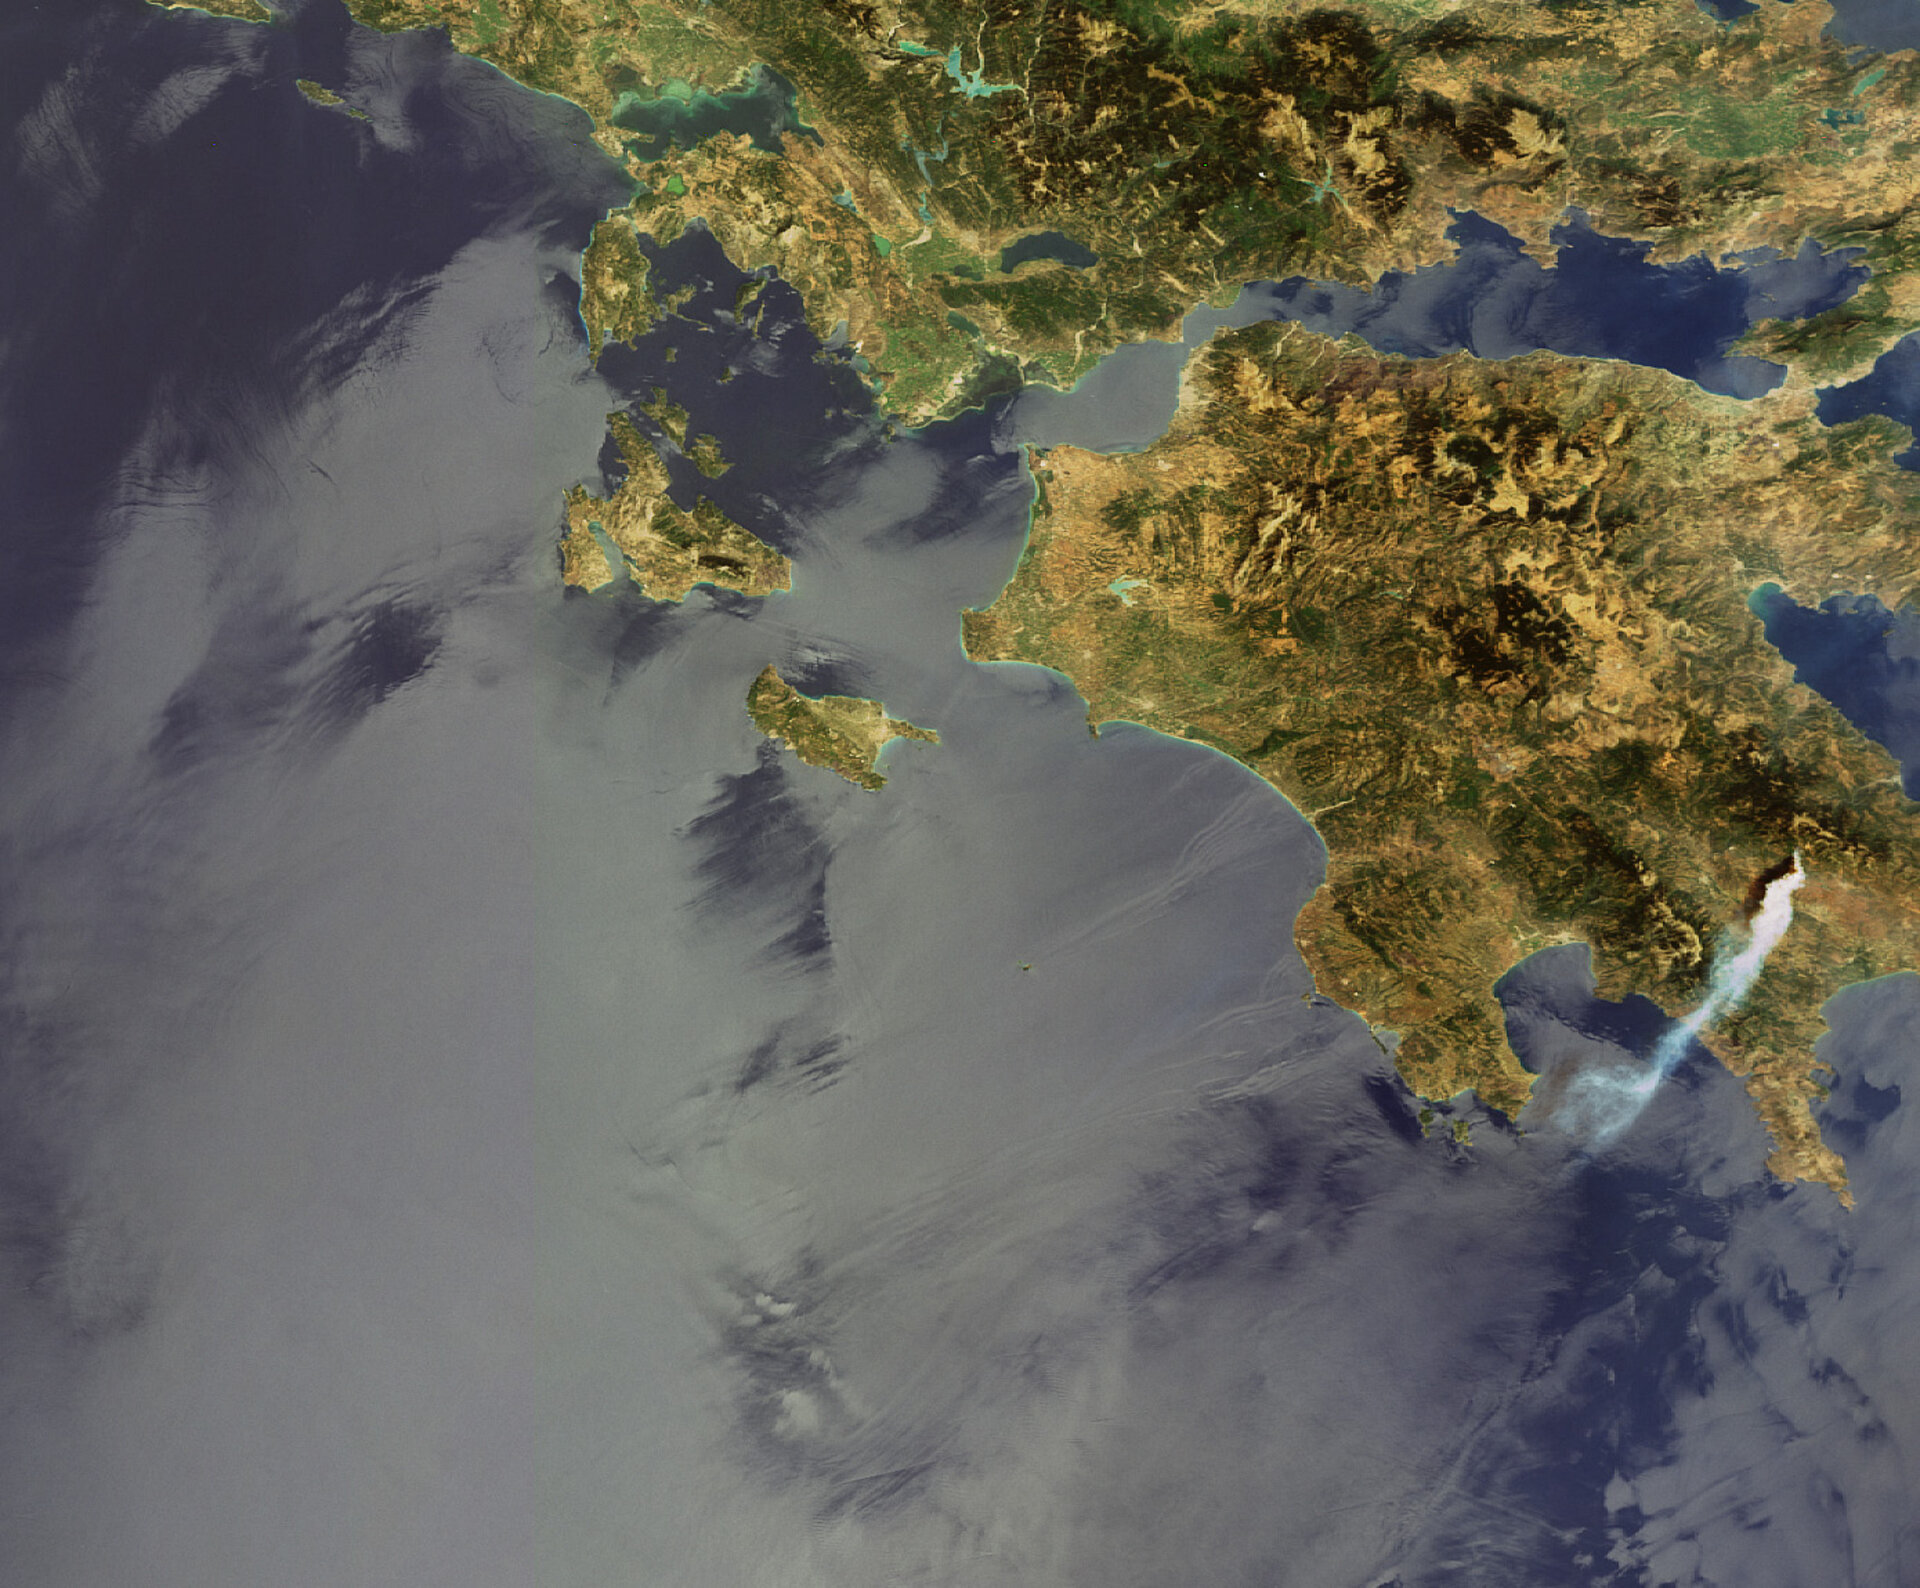 Fires starting in Greece on 23 August 2007